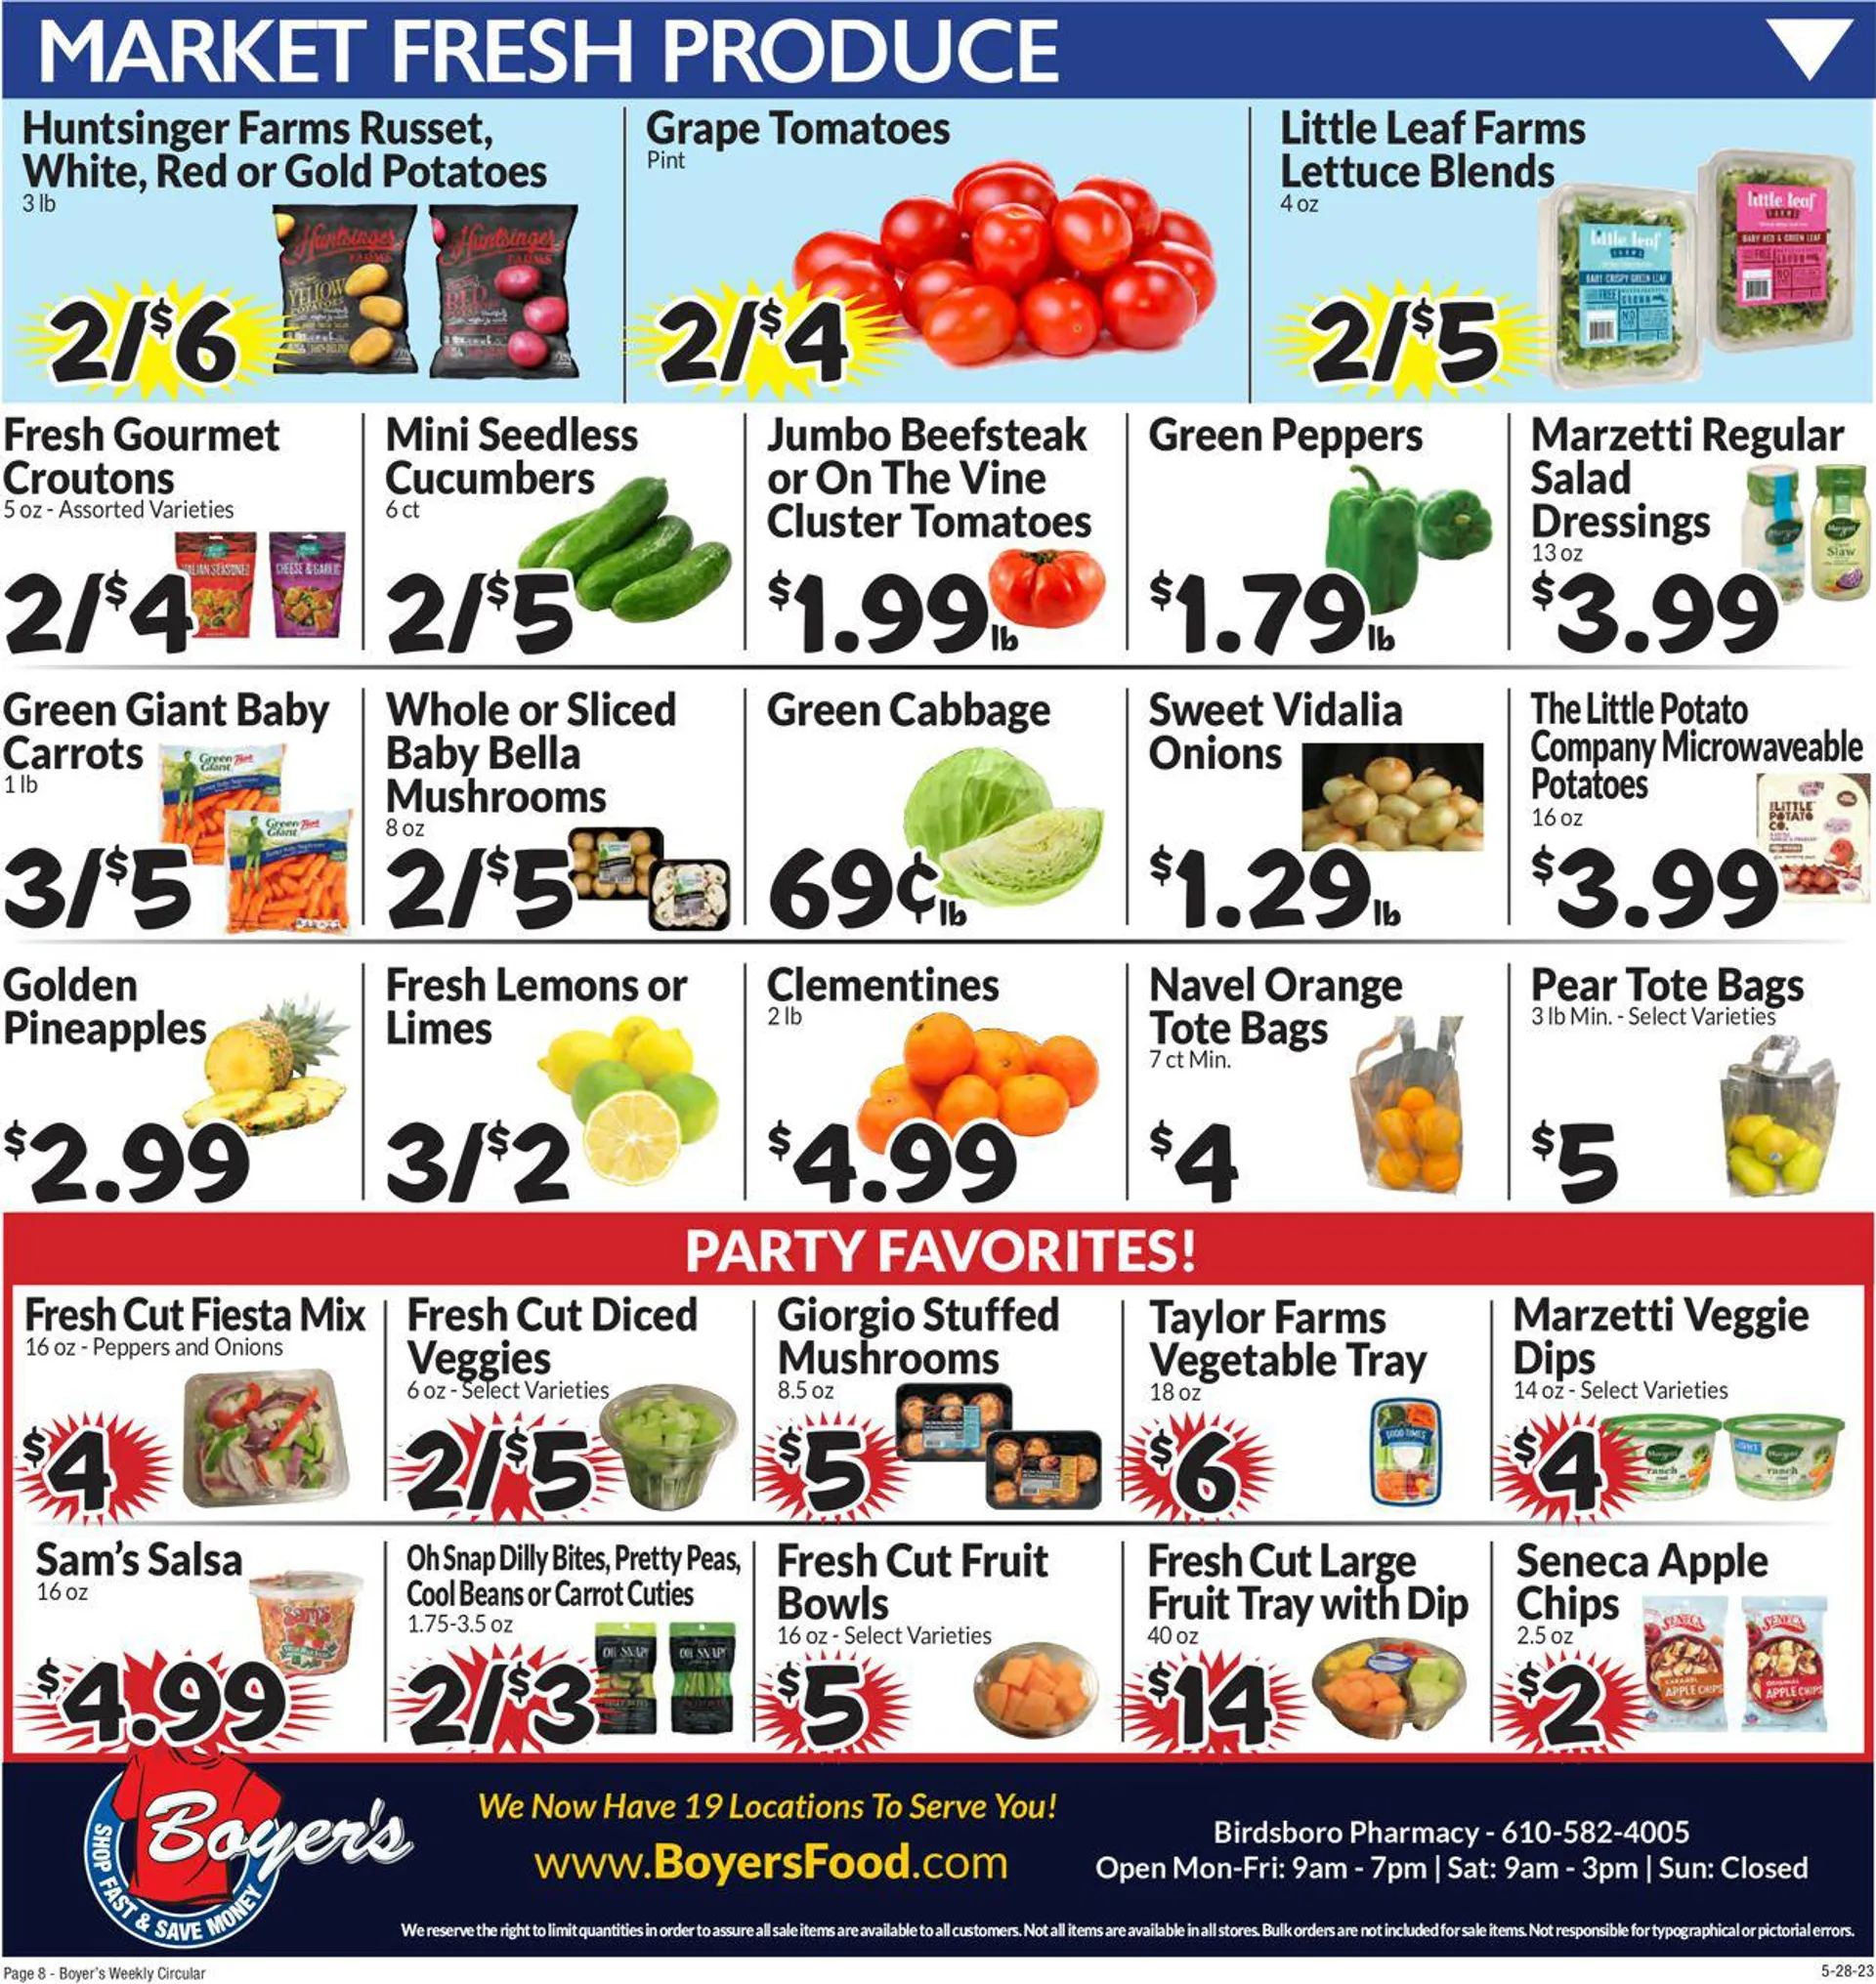 Boyers Food Markets Current weekly ad - 13